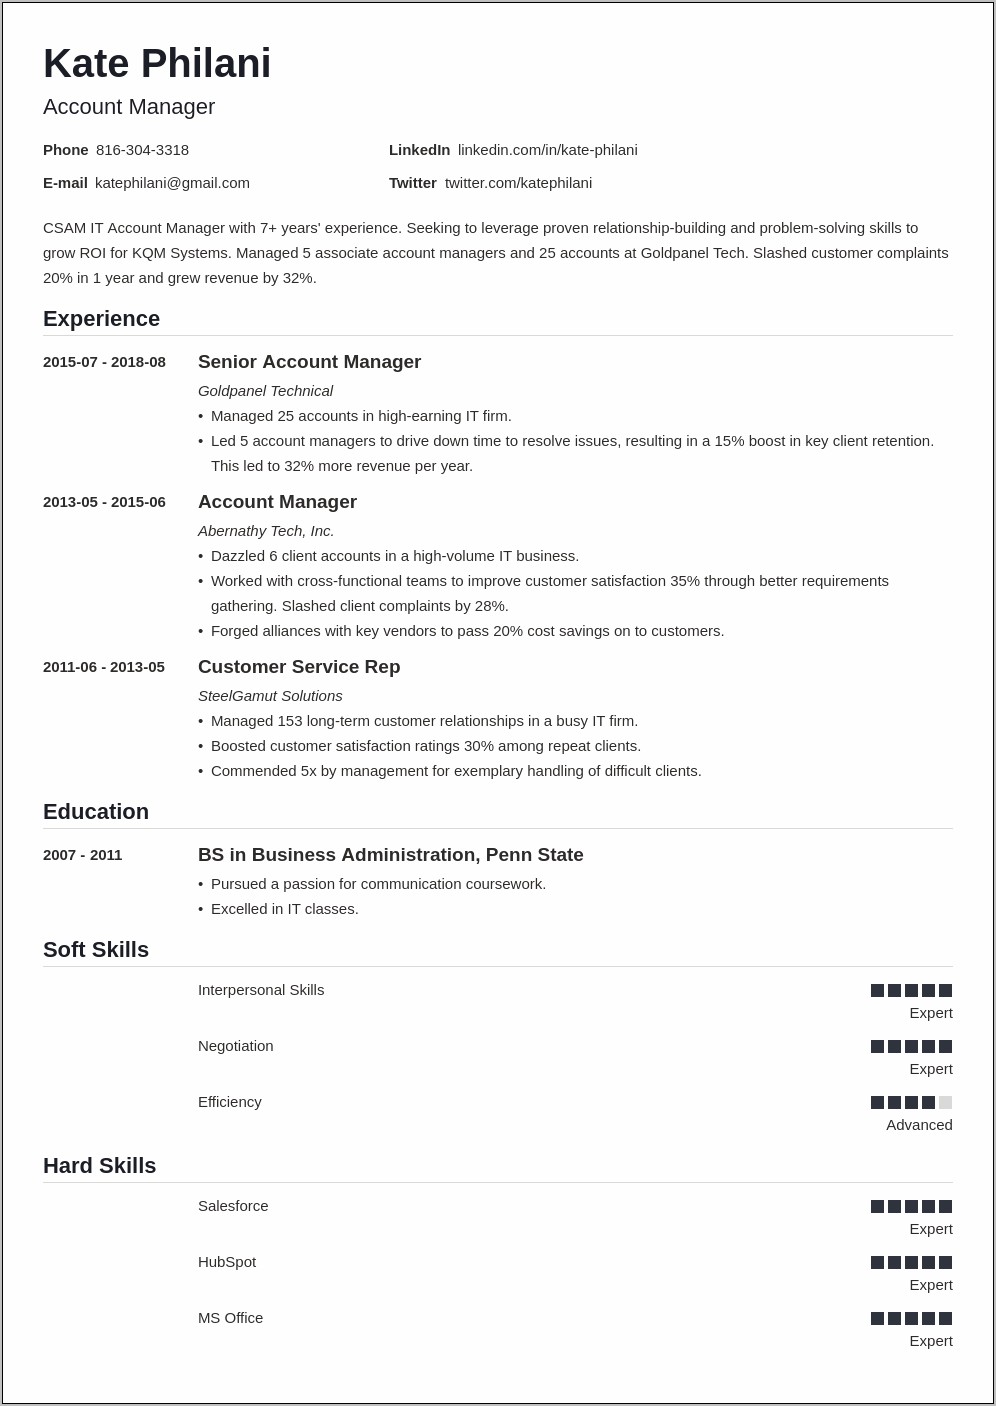 National Account Manager Resume Summary